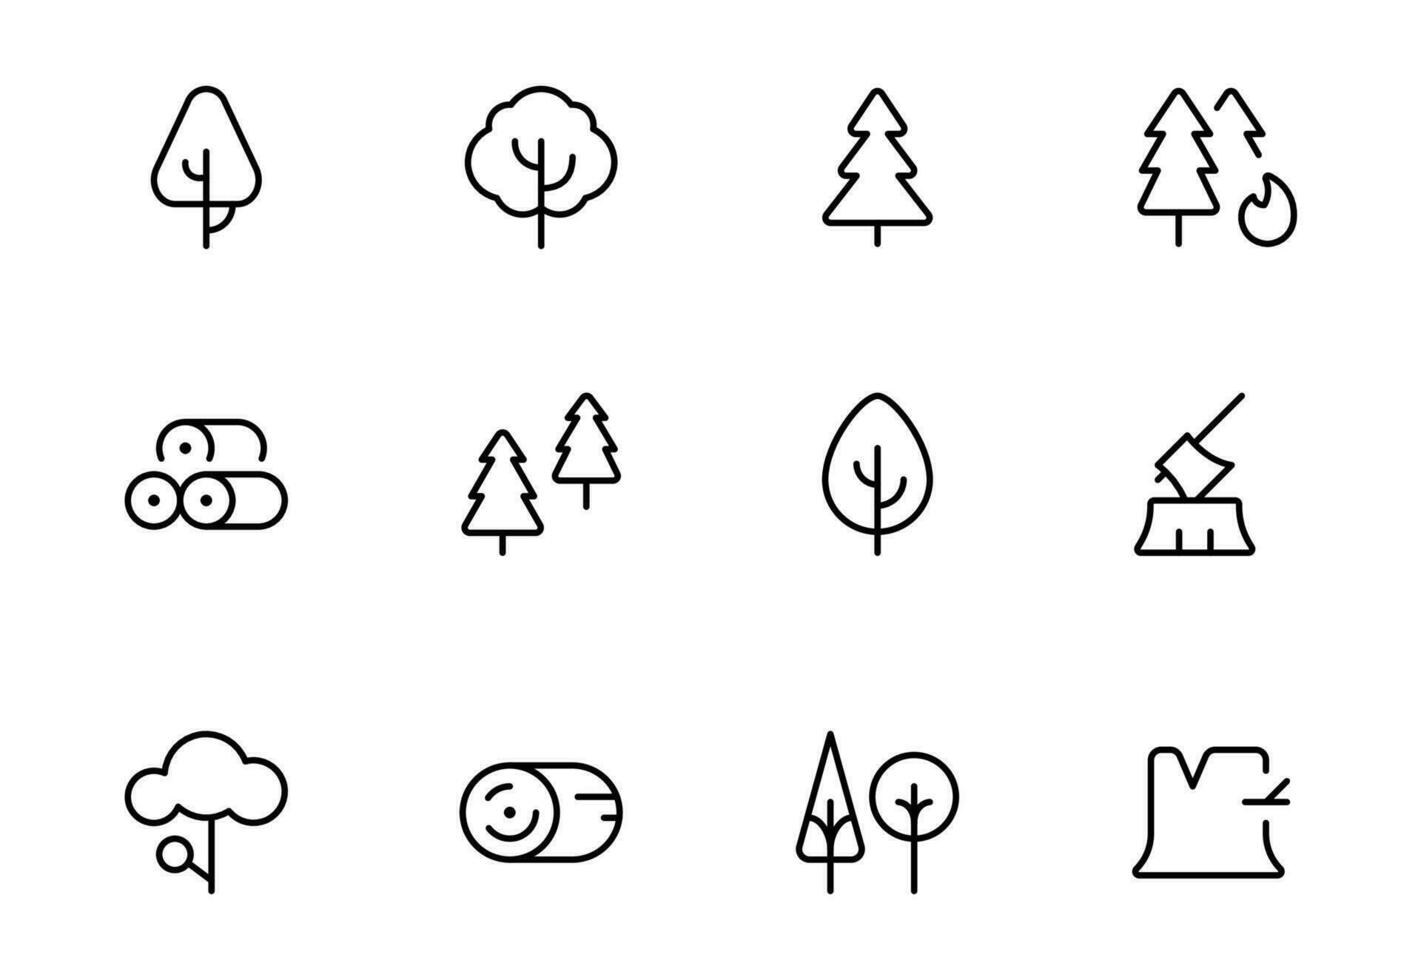 tree icon. tree related icon, cutting tree icon. flat vector and illustration, graphic, editable stroke. Suitable for website design, logo, app, template, and ui ux.